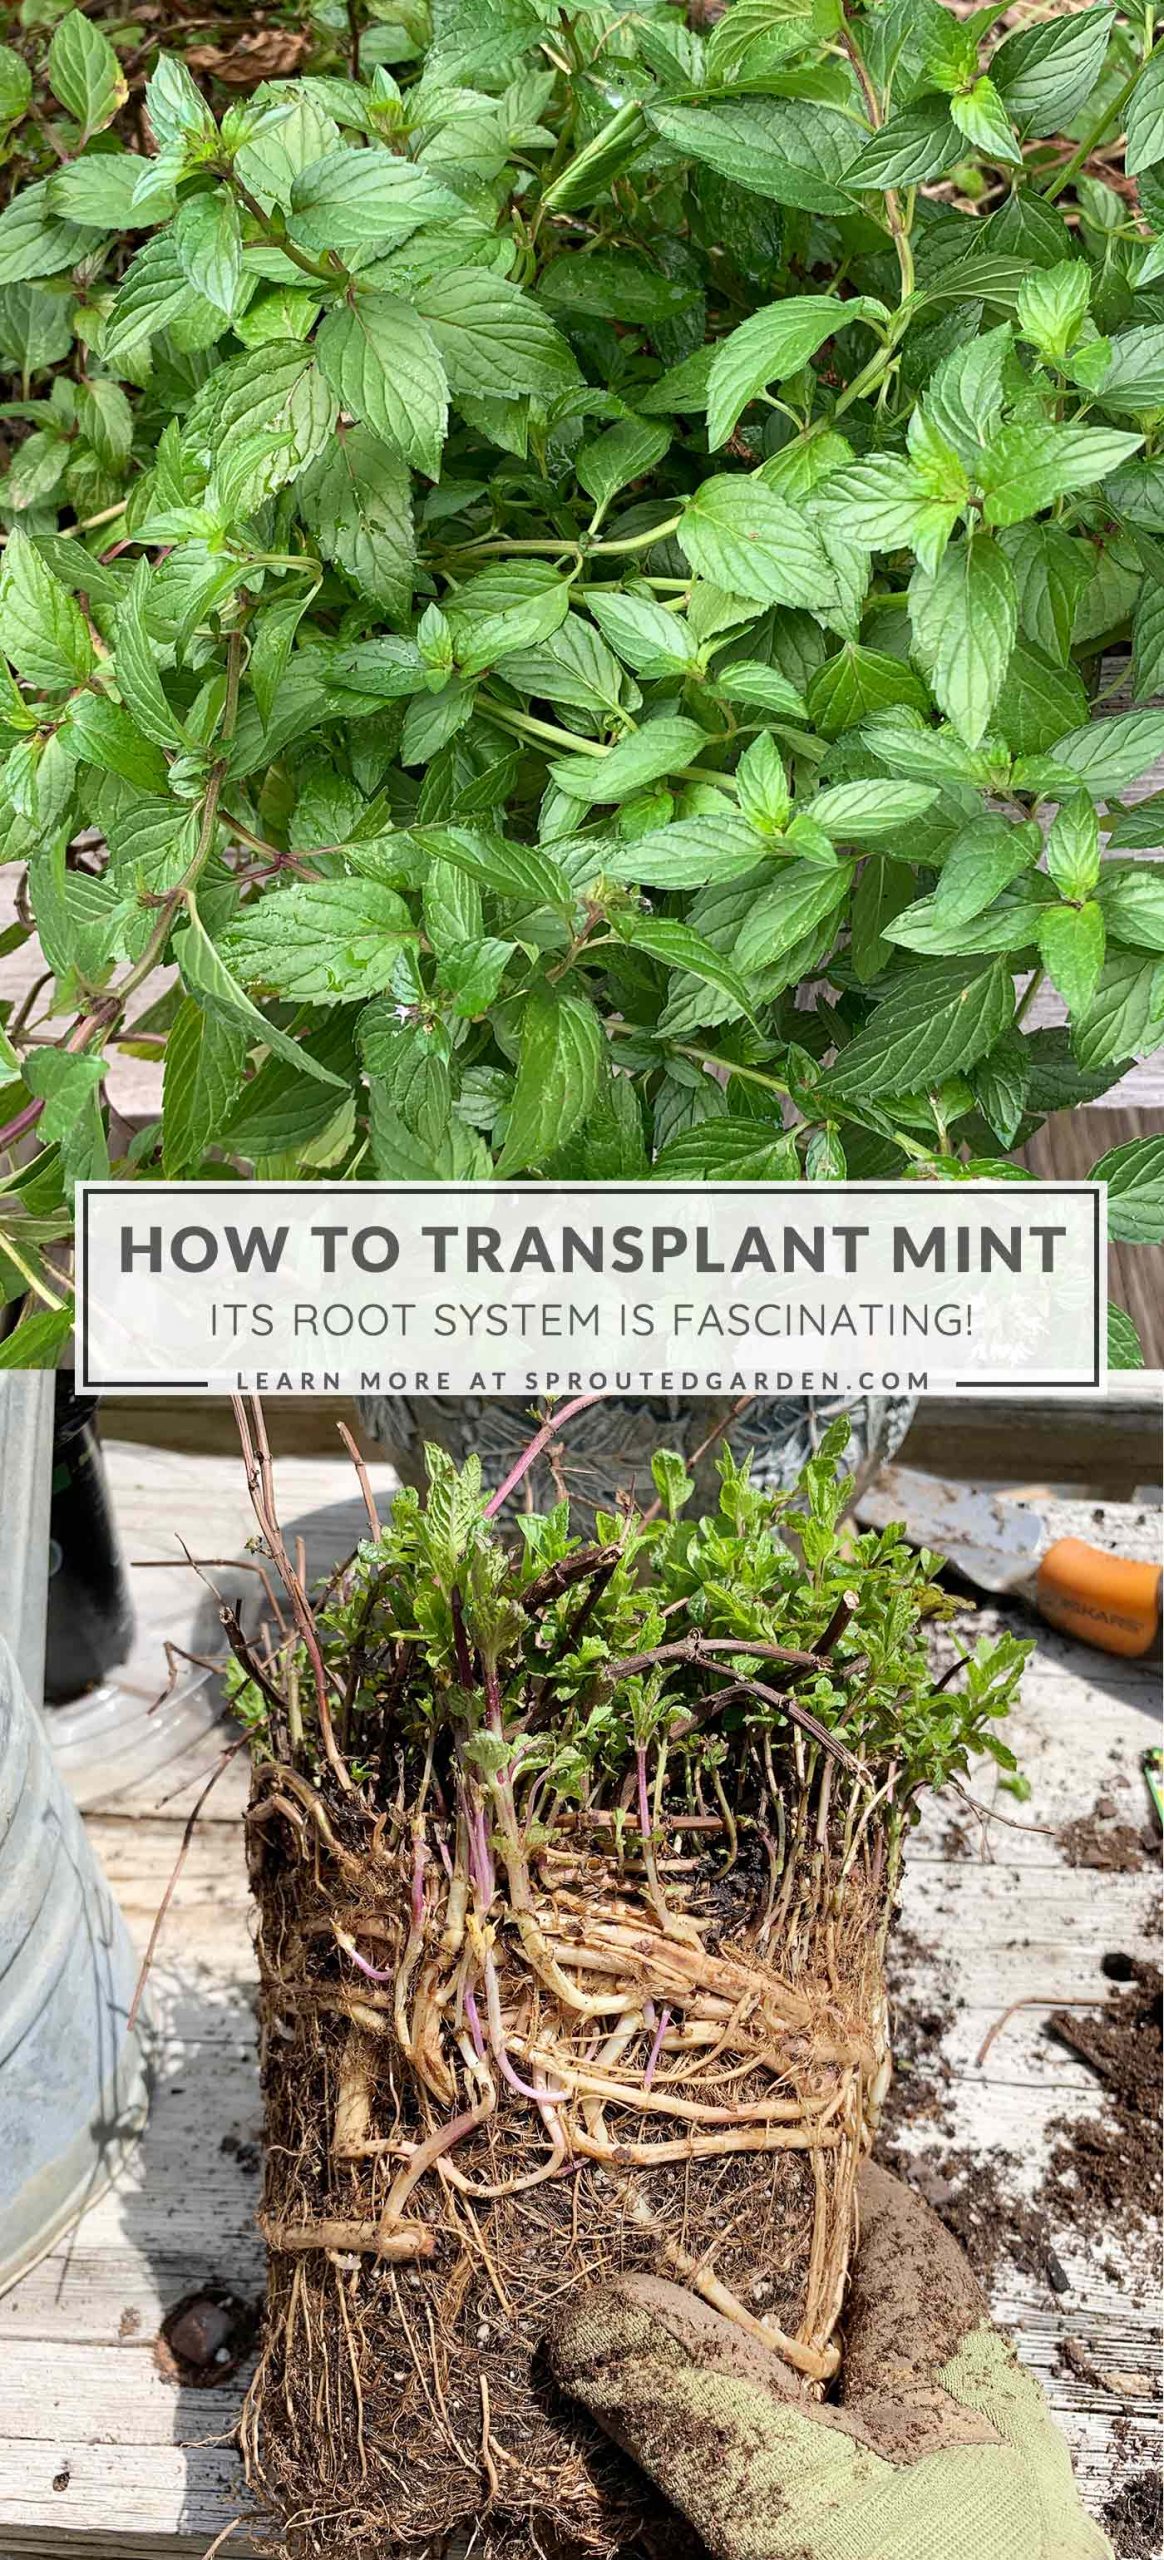 How to Transplant Mint